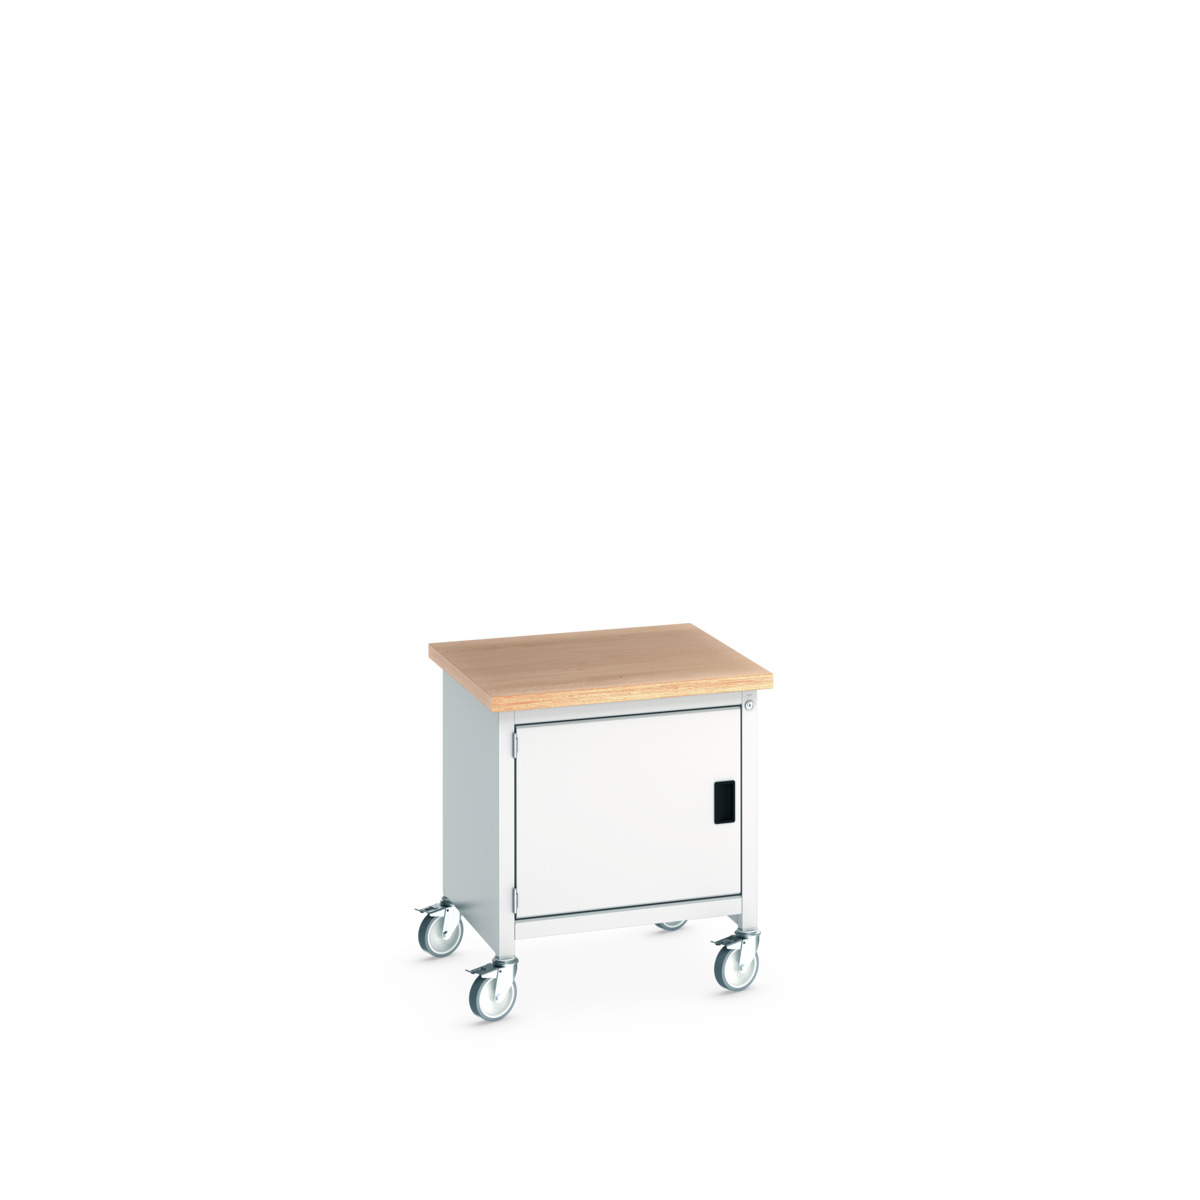 41002085.16V - cubio mobile storage bench (mpx)